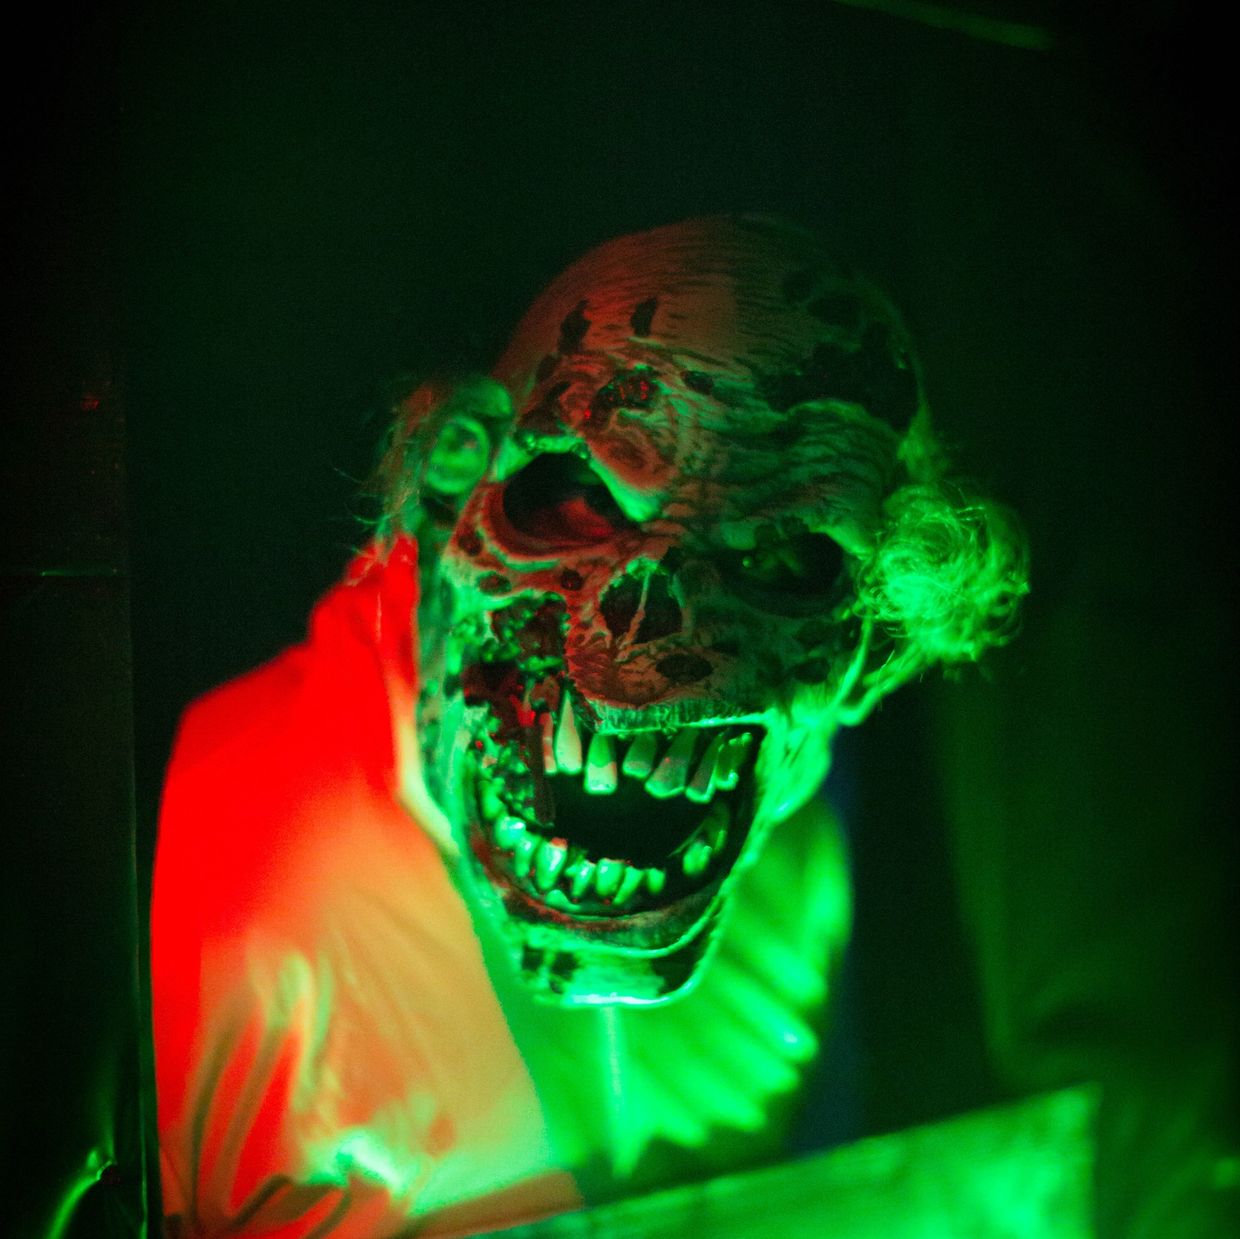 Actor with a zombie mask on, jumping out of a drop wall